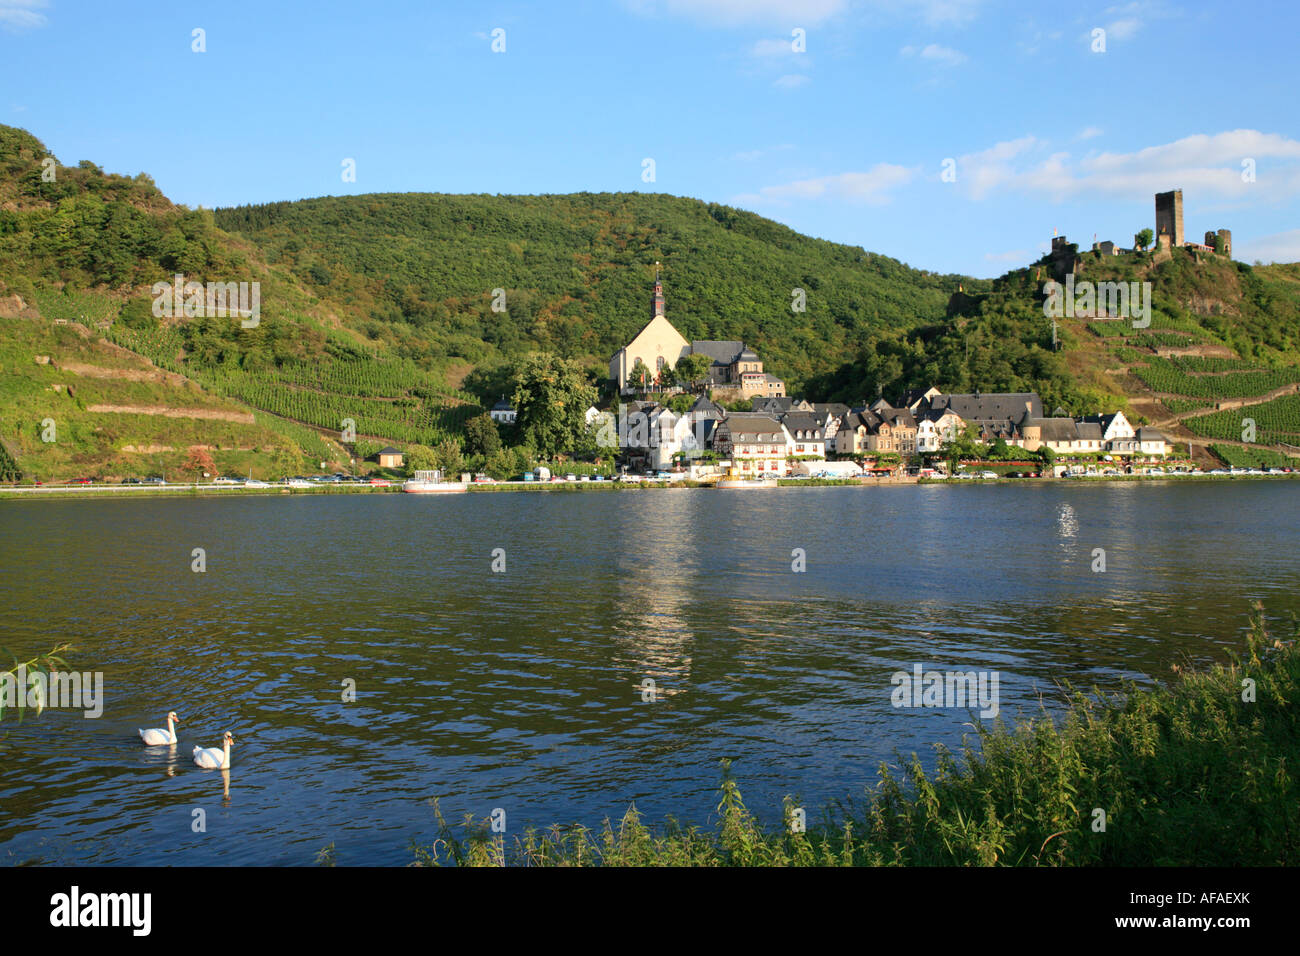 the ruins of Metternich Castle towering over the small town Beilstein in the River Moselle Valley in Germany Stock Photo